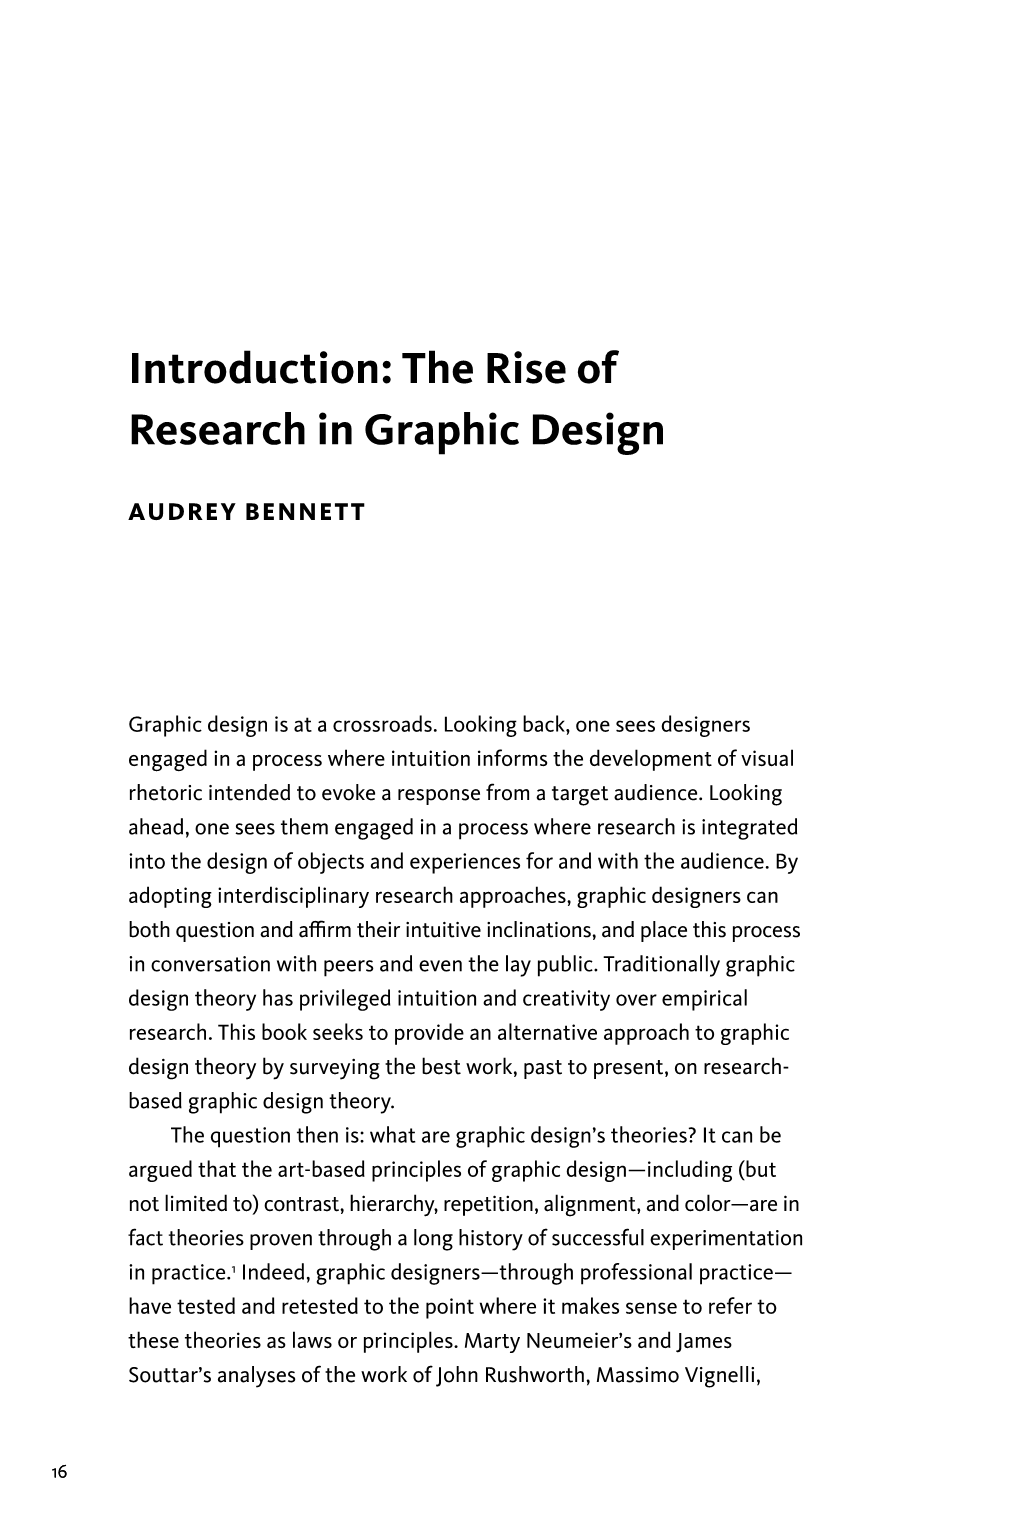 The Rise of Research in Graphic Design